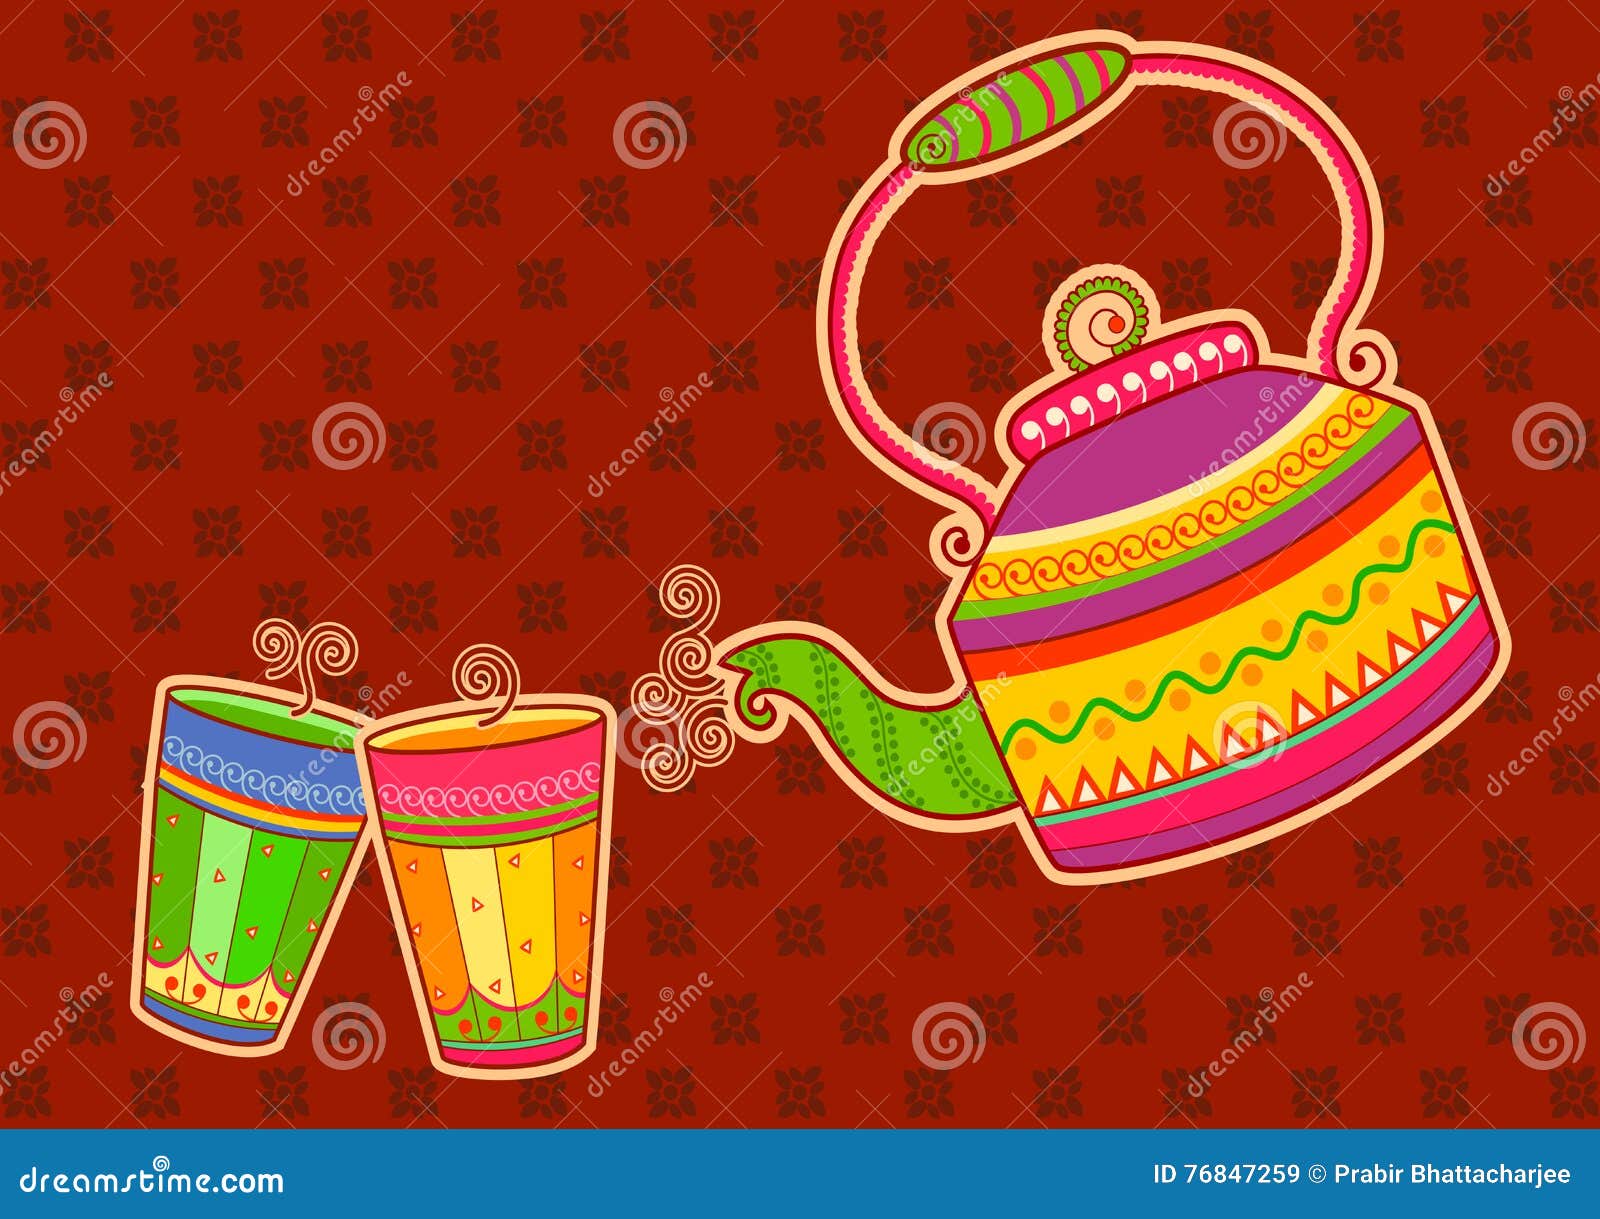 Vector illustration of Tea Pot and Tea Glasses. Indian Chai Kettle and Chai  glasses. Chai Ad concept Stock Vector